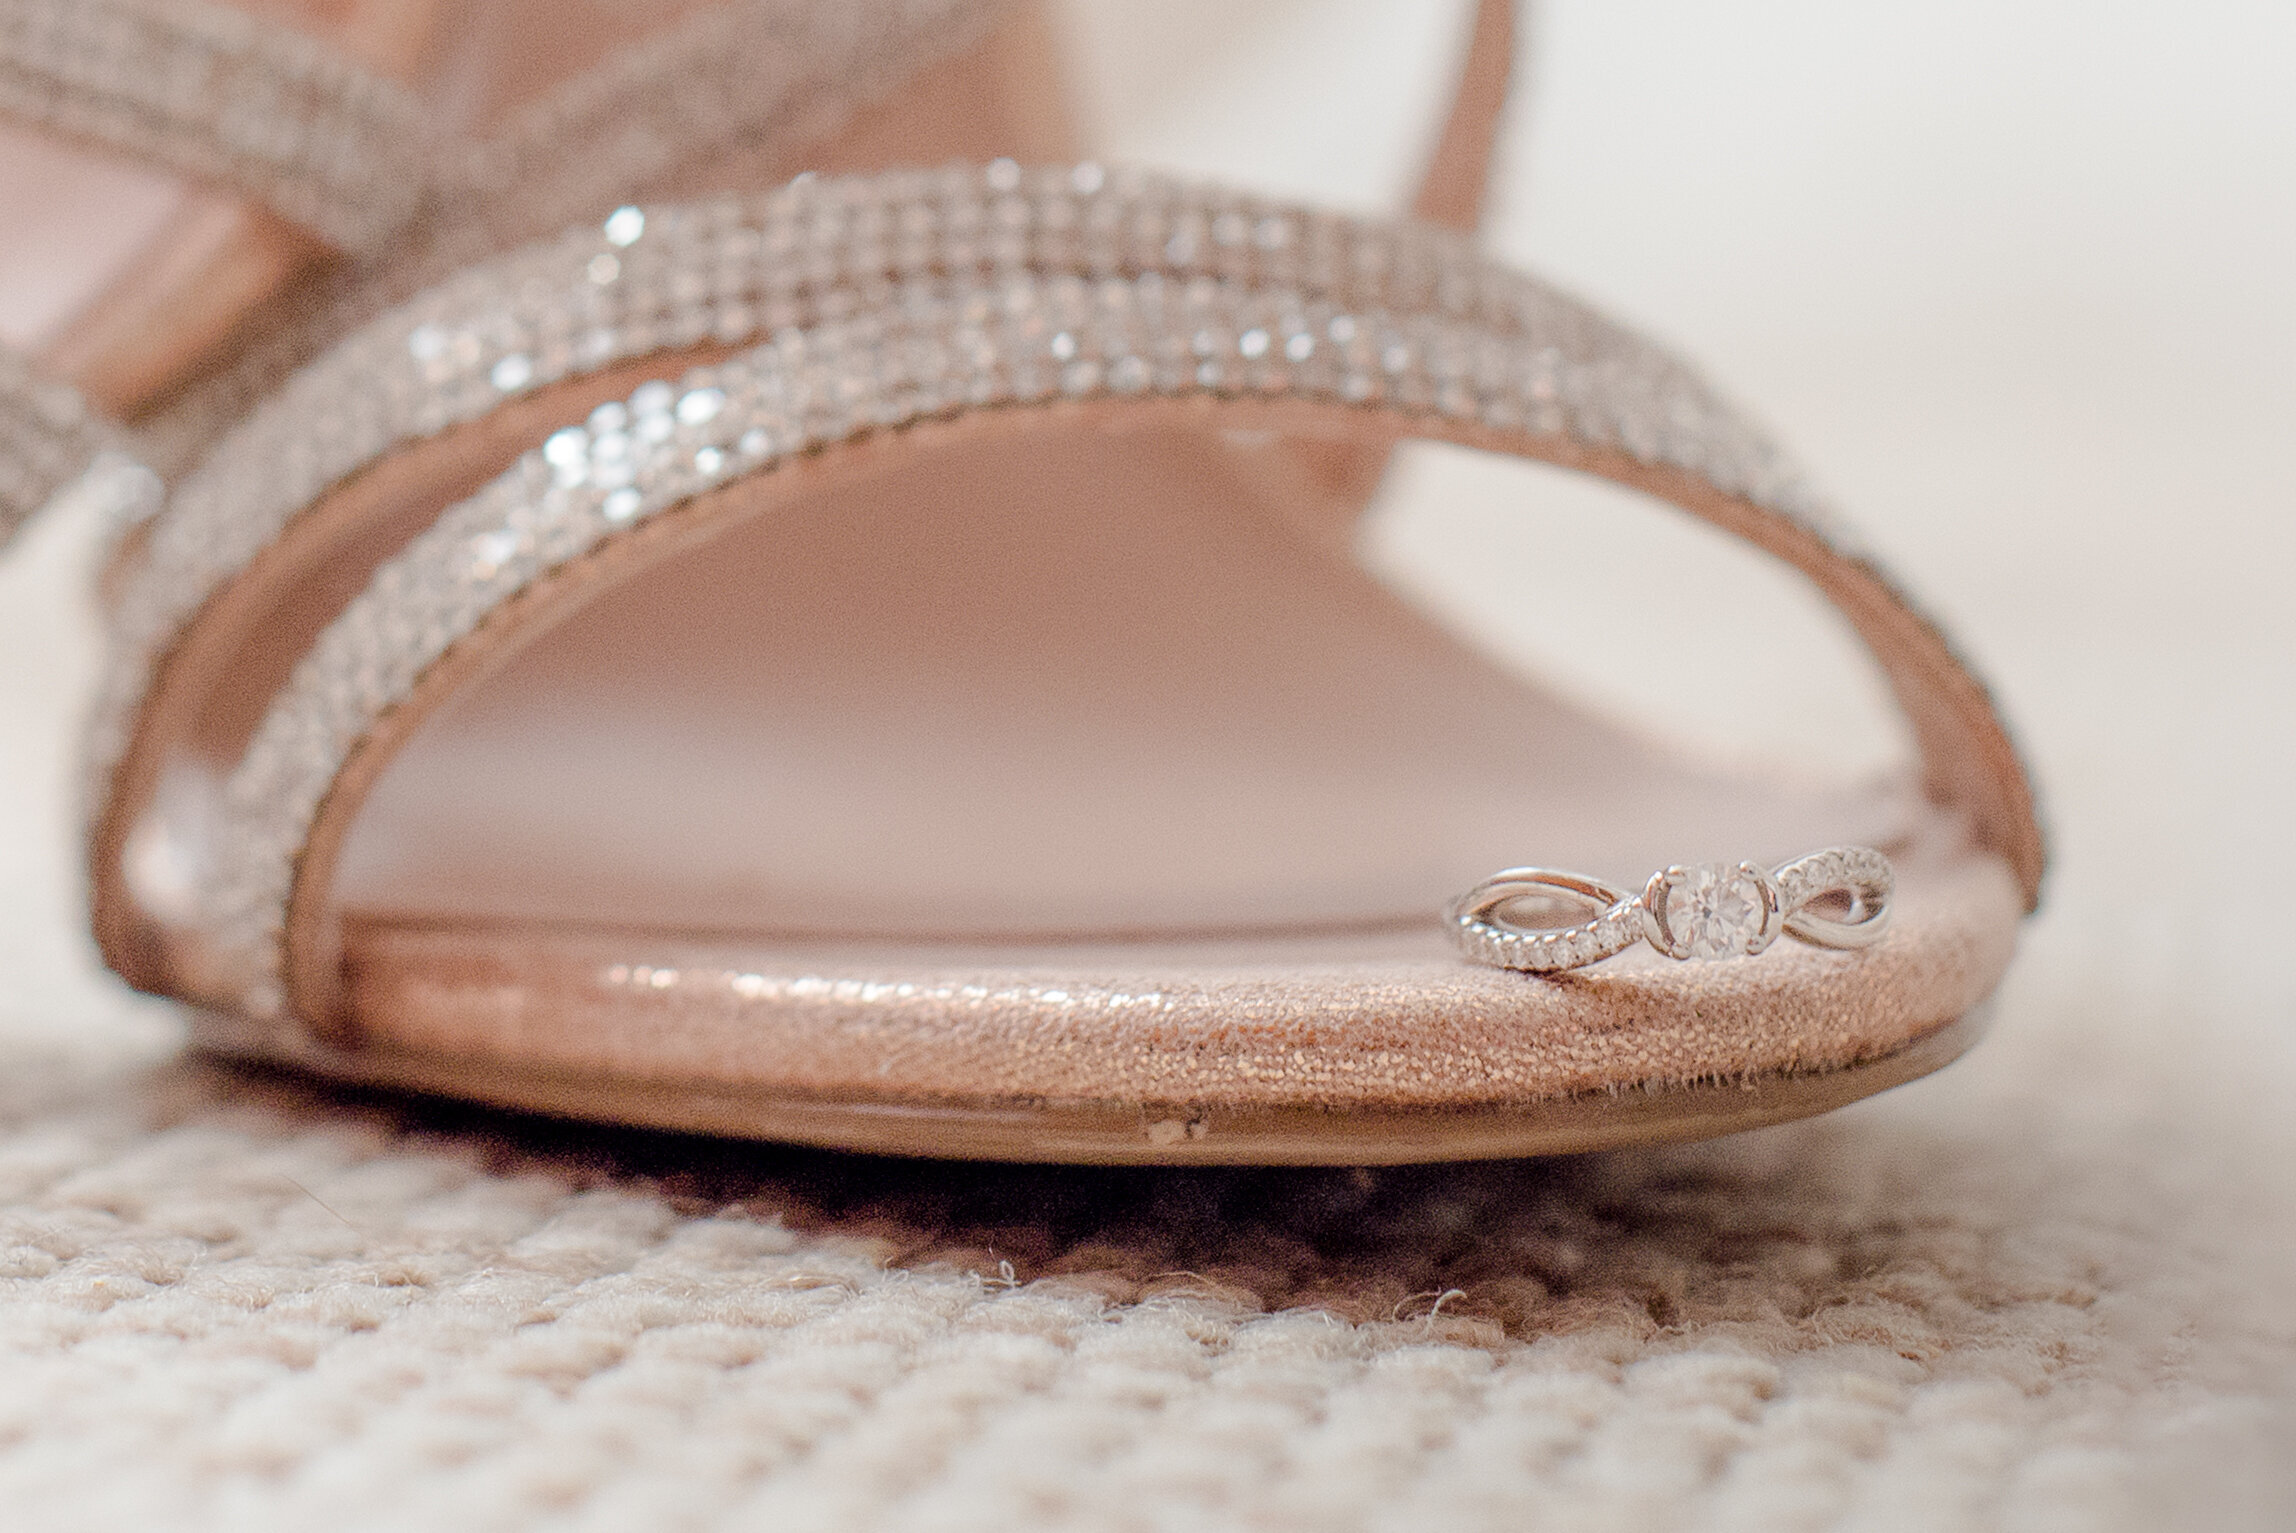 detail shot of wedding shoes and ring